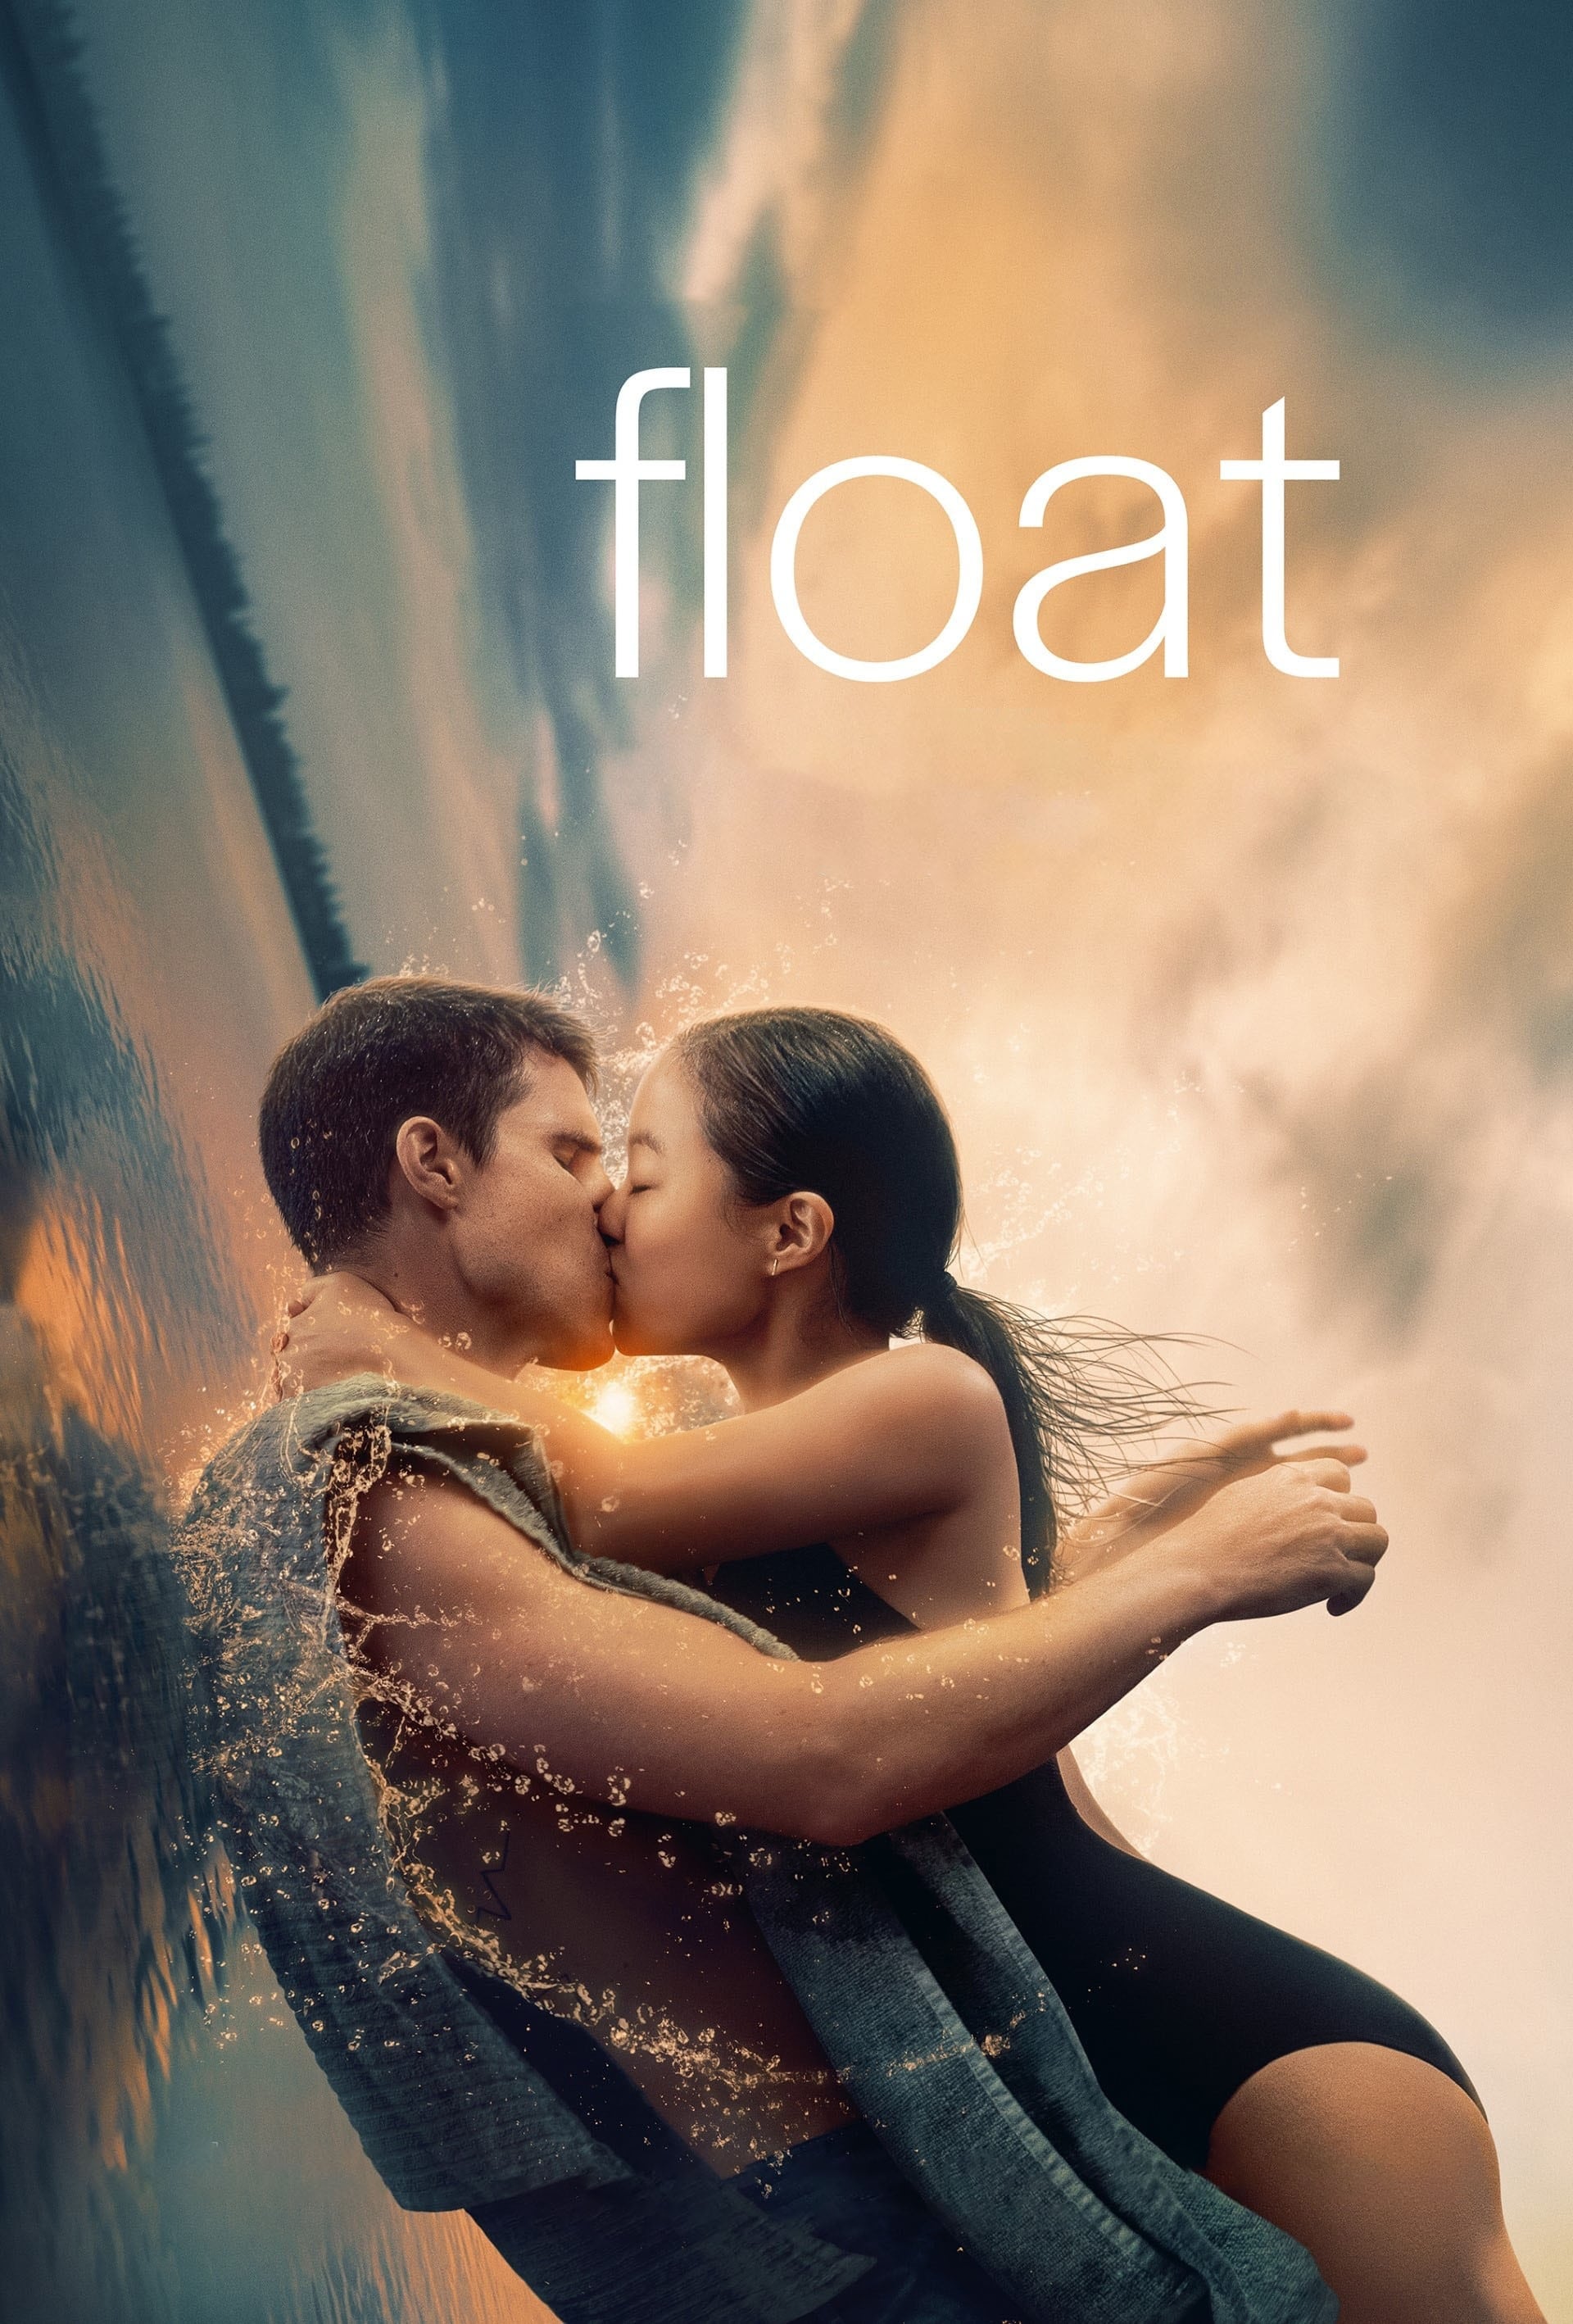 Image for movie Float